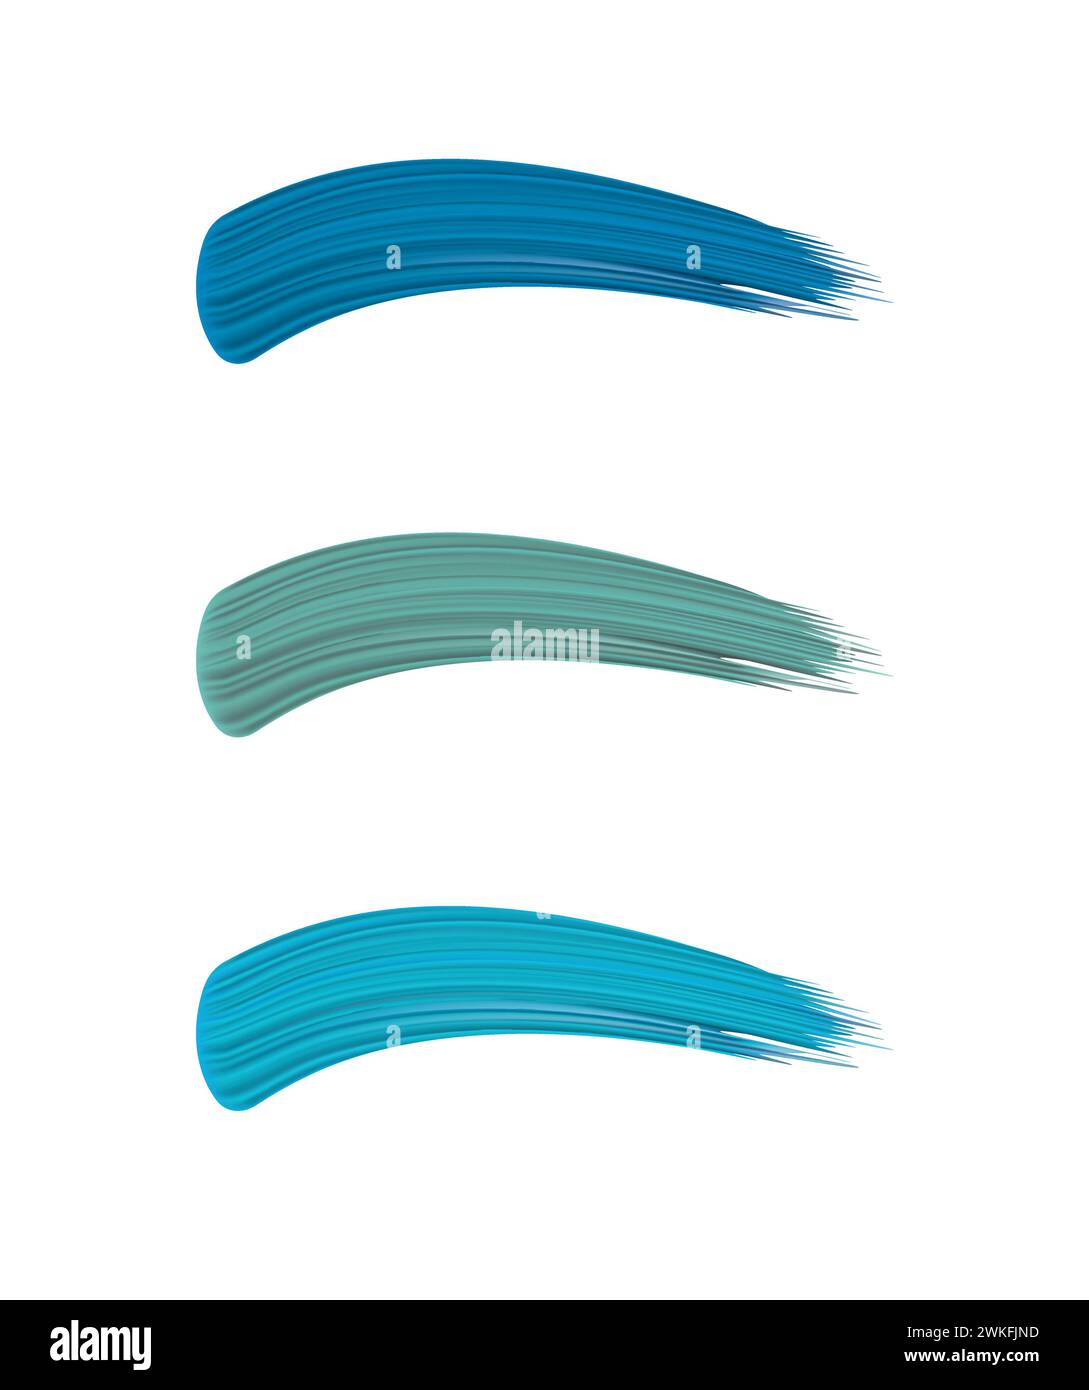 Blue brush strokes in different shades, vector Stock Vector